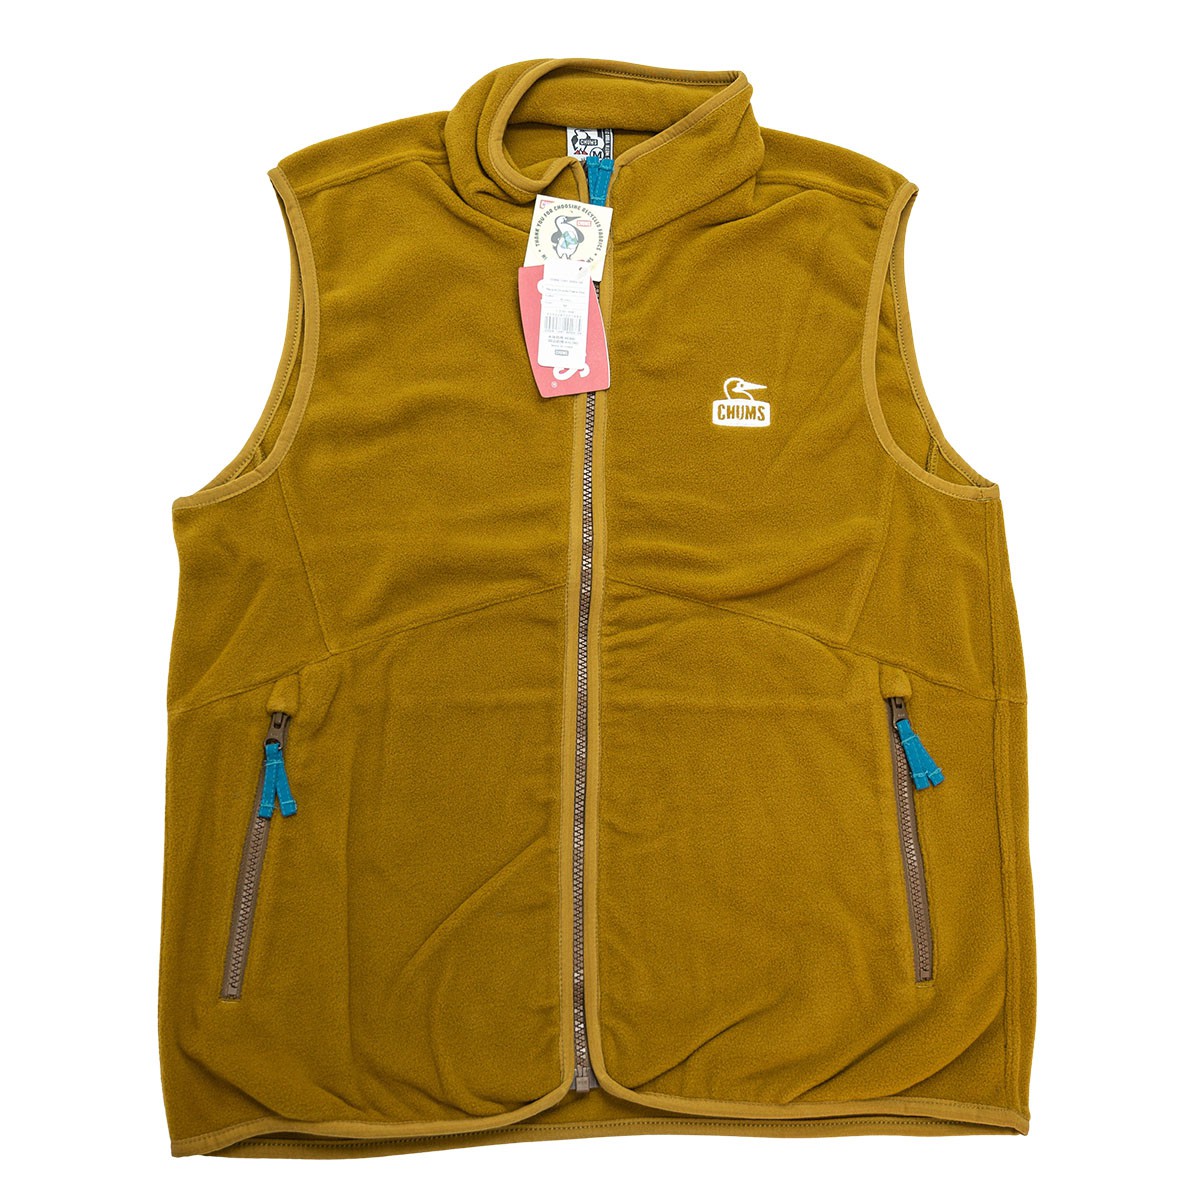 Chums Recycle Chumley Fleece Vest Brown 啡色抓毛背心 <旺角店>